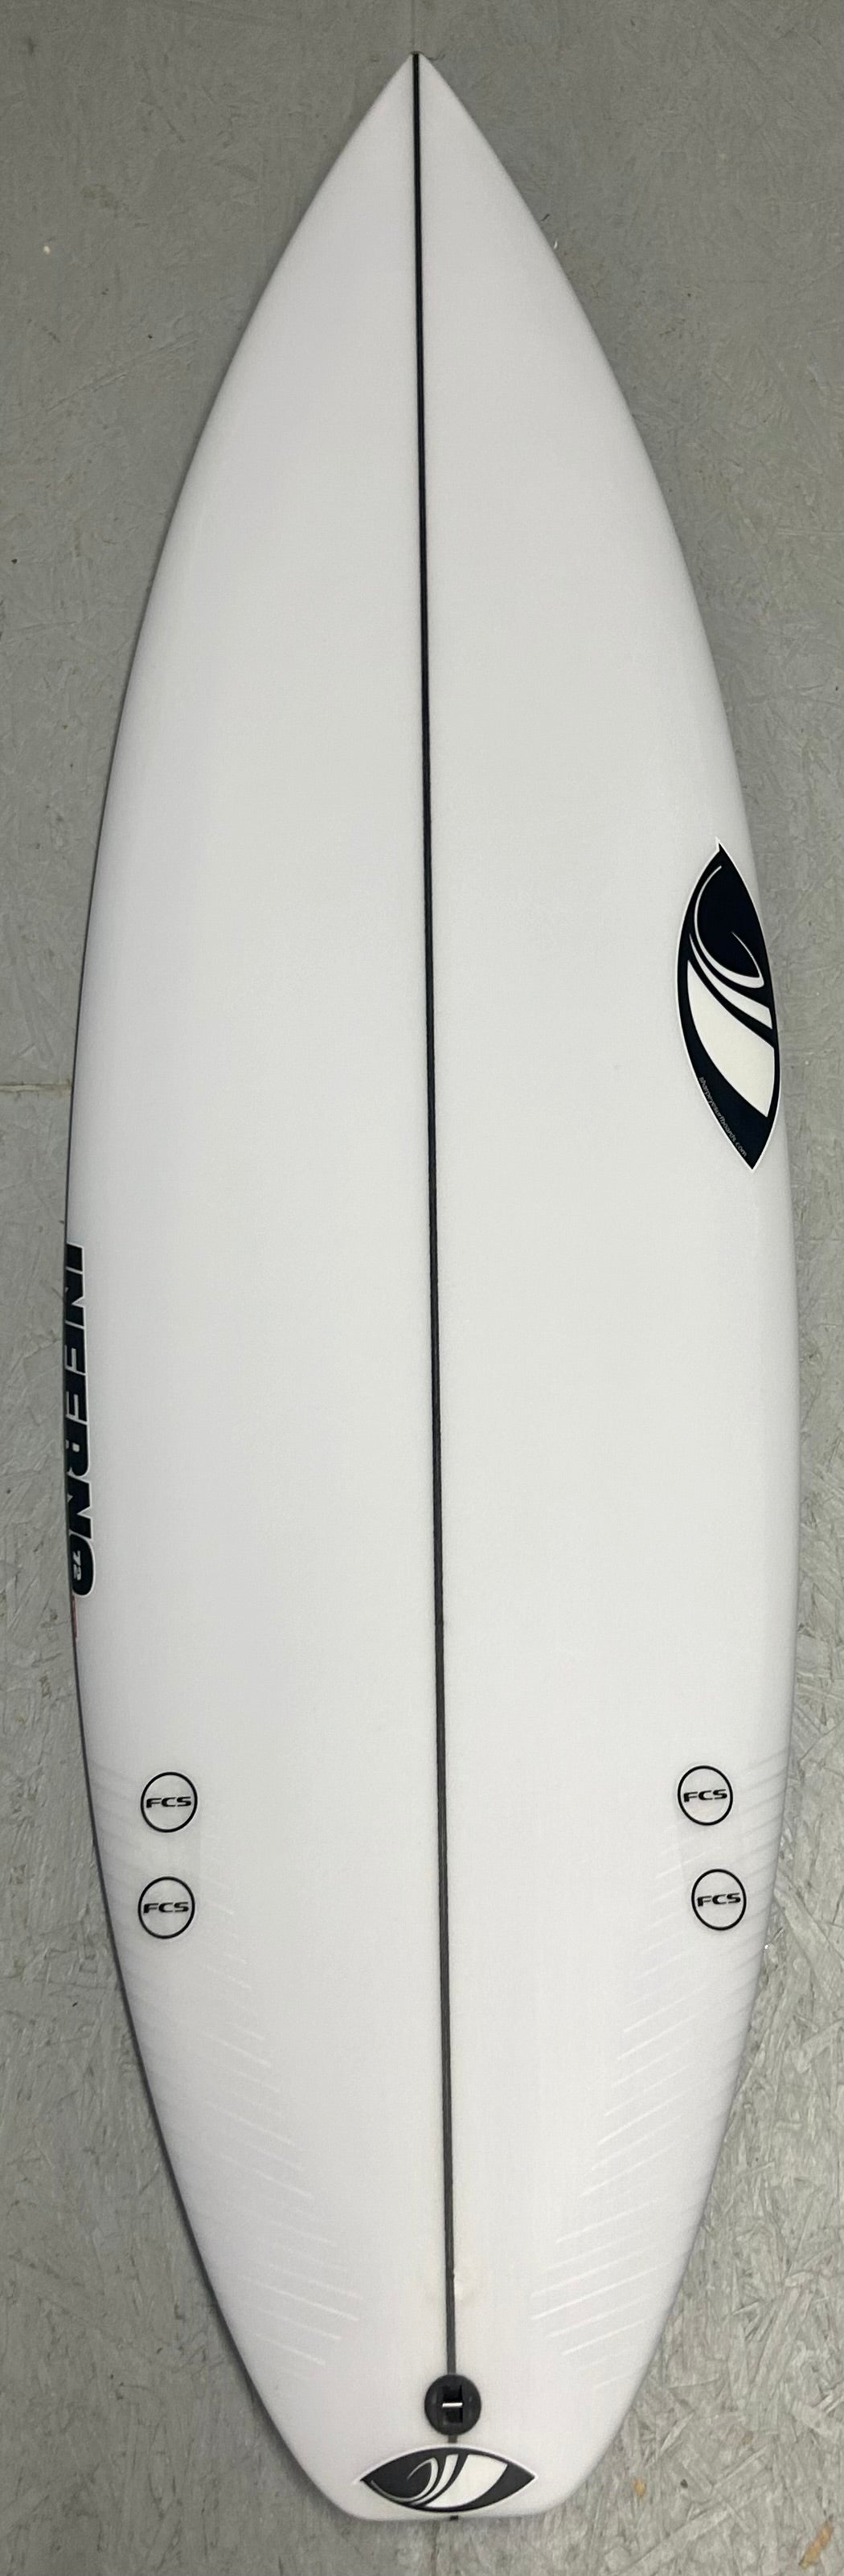 Used Surfboards and Seconds – Page 2 – Sharp Eye Surfboards